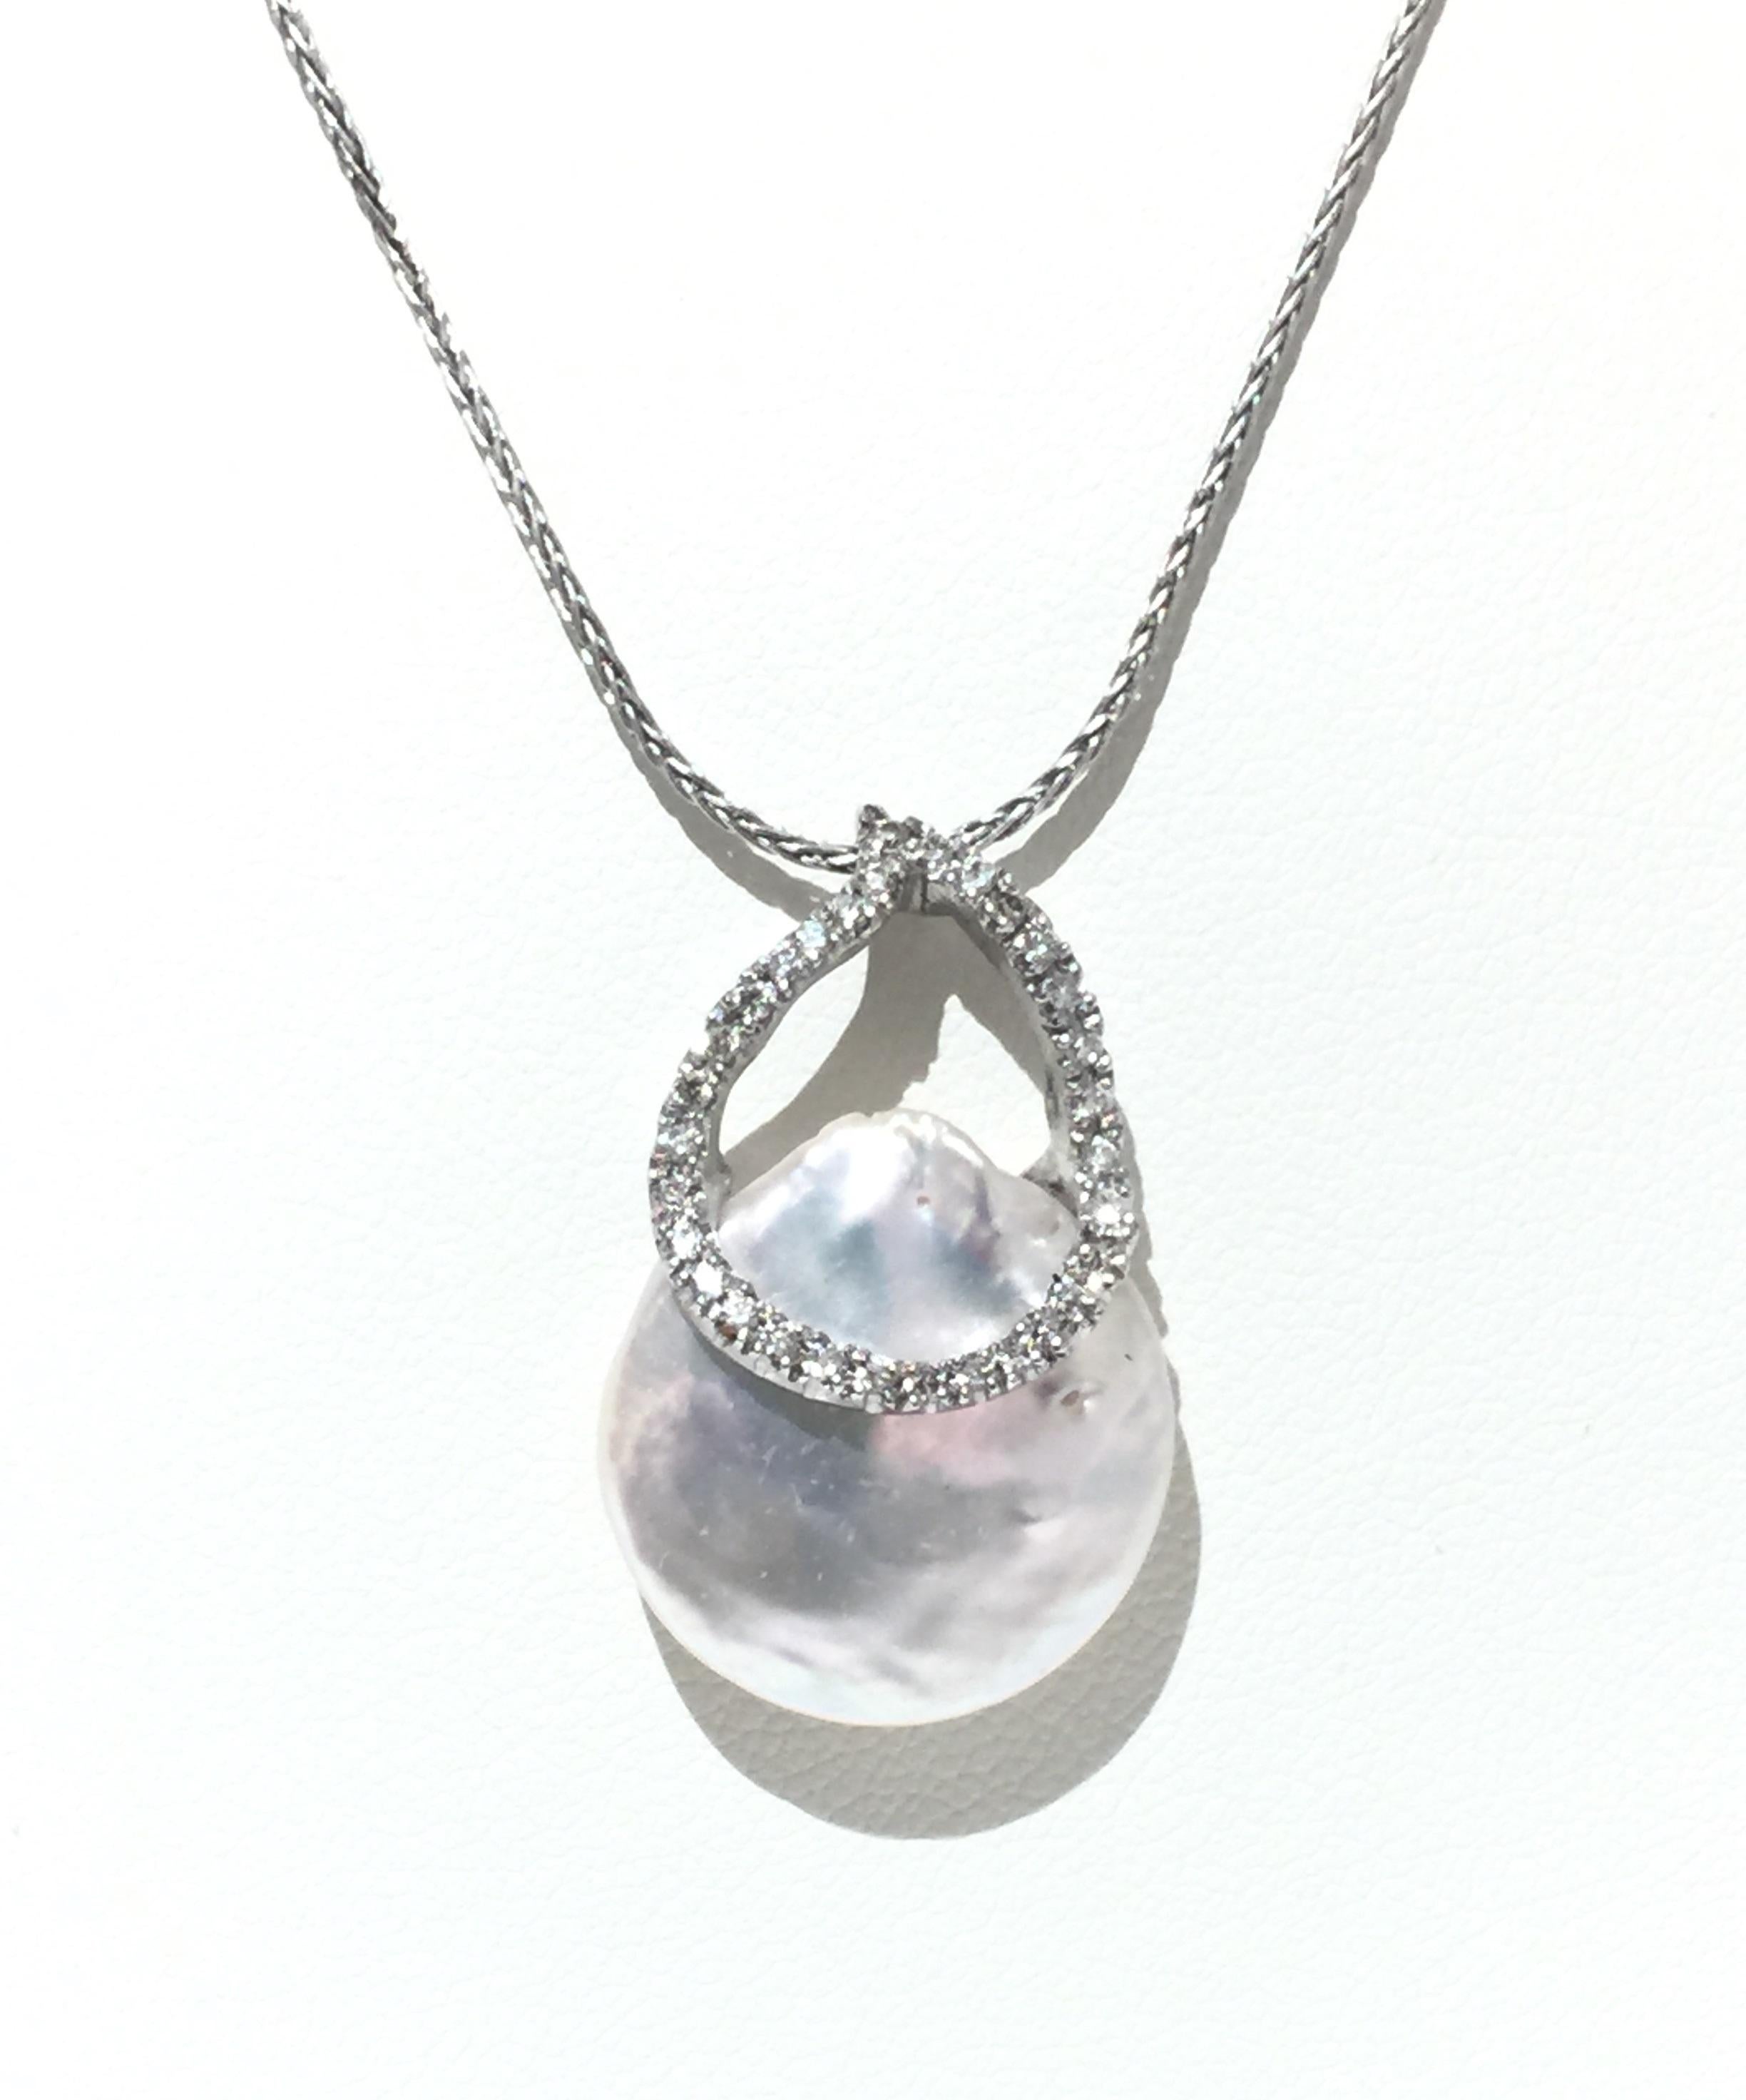 Yvel Pearl and Diamonds Necklace.
18k White Gold 
Pearl 
Diamonds 0.25ctw
Length 16 inches 
N1TIPAW